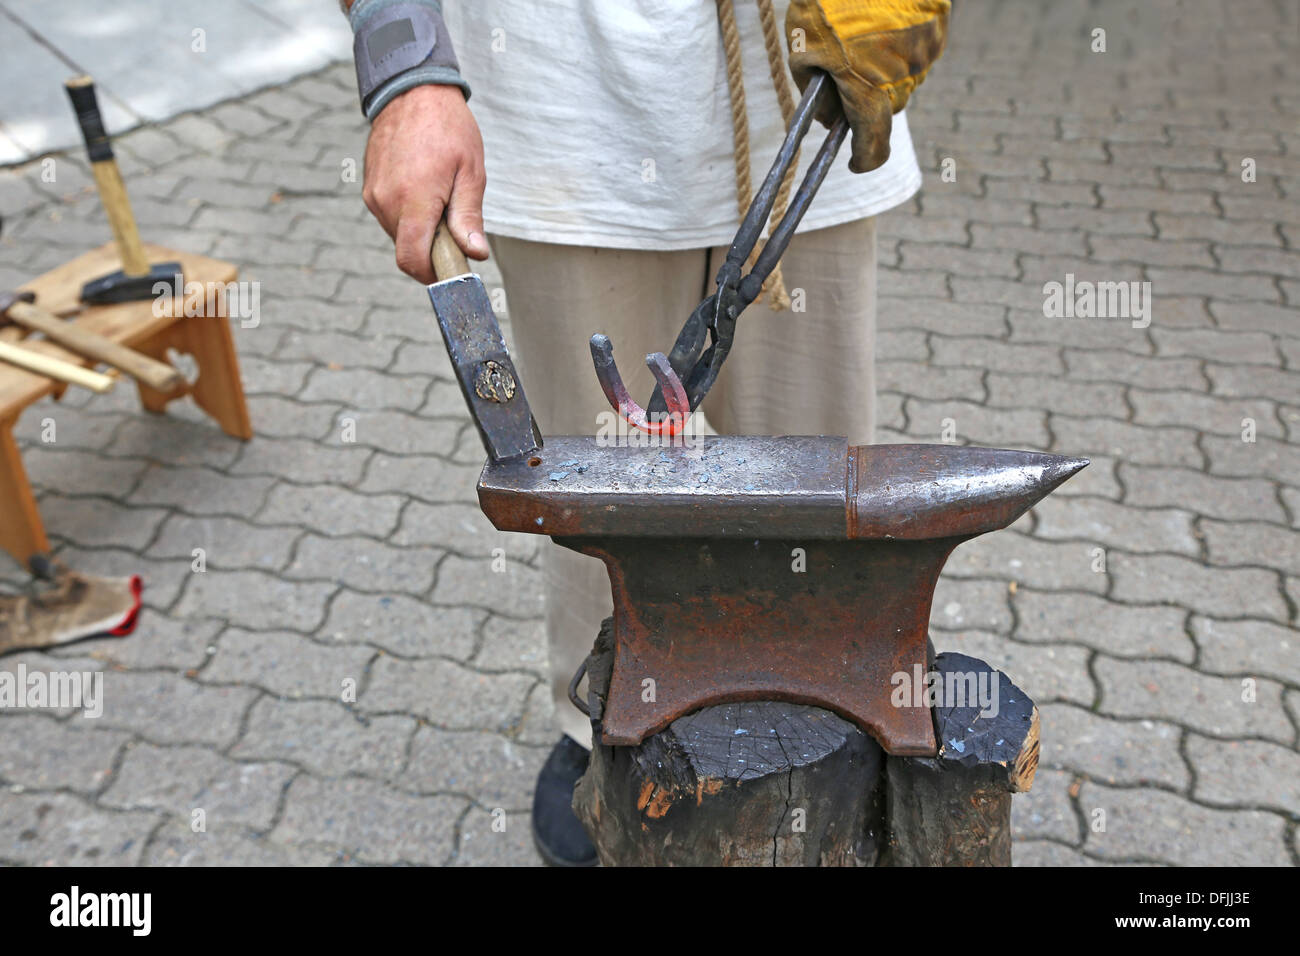 Blacksmith forges a horseshoe, on the anvil Stock Photo